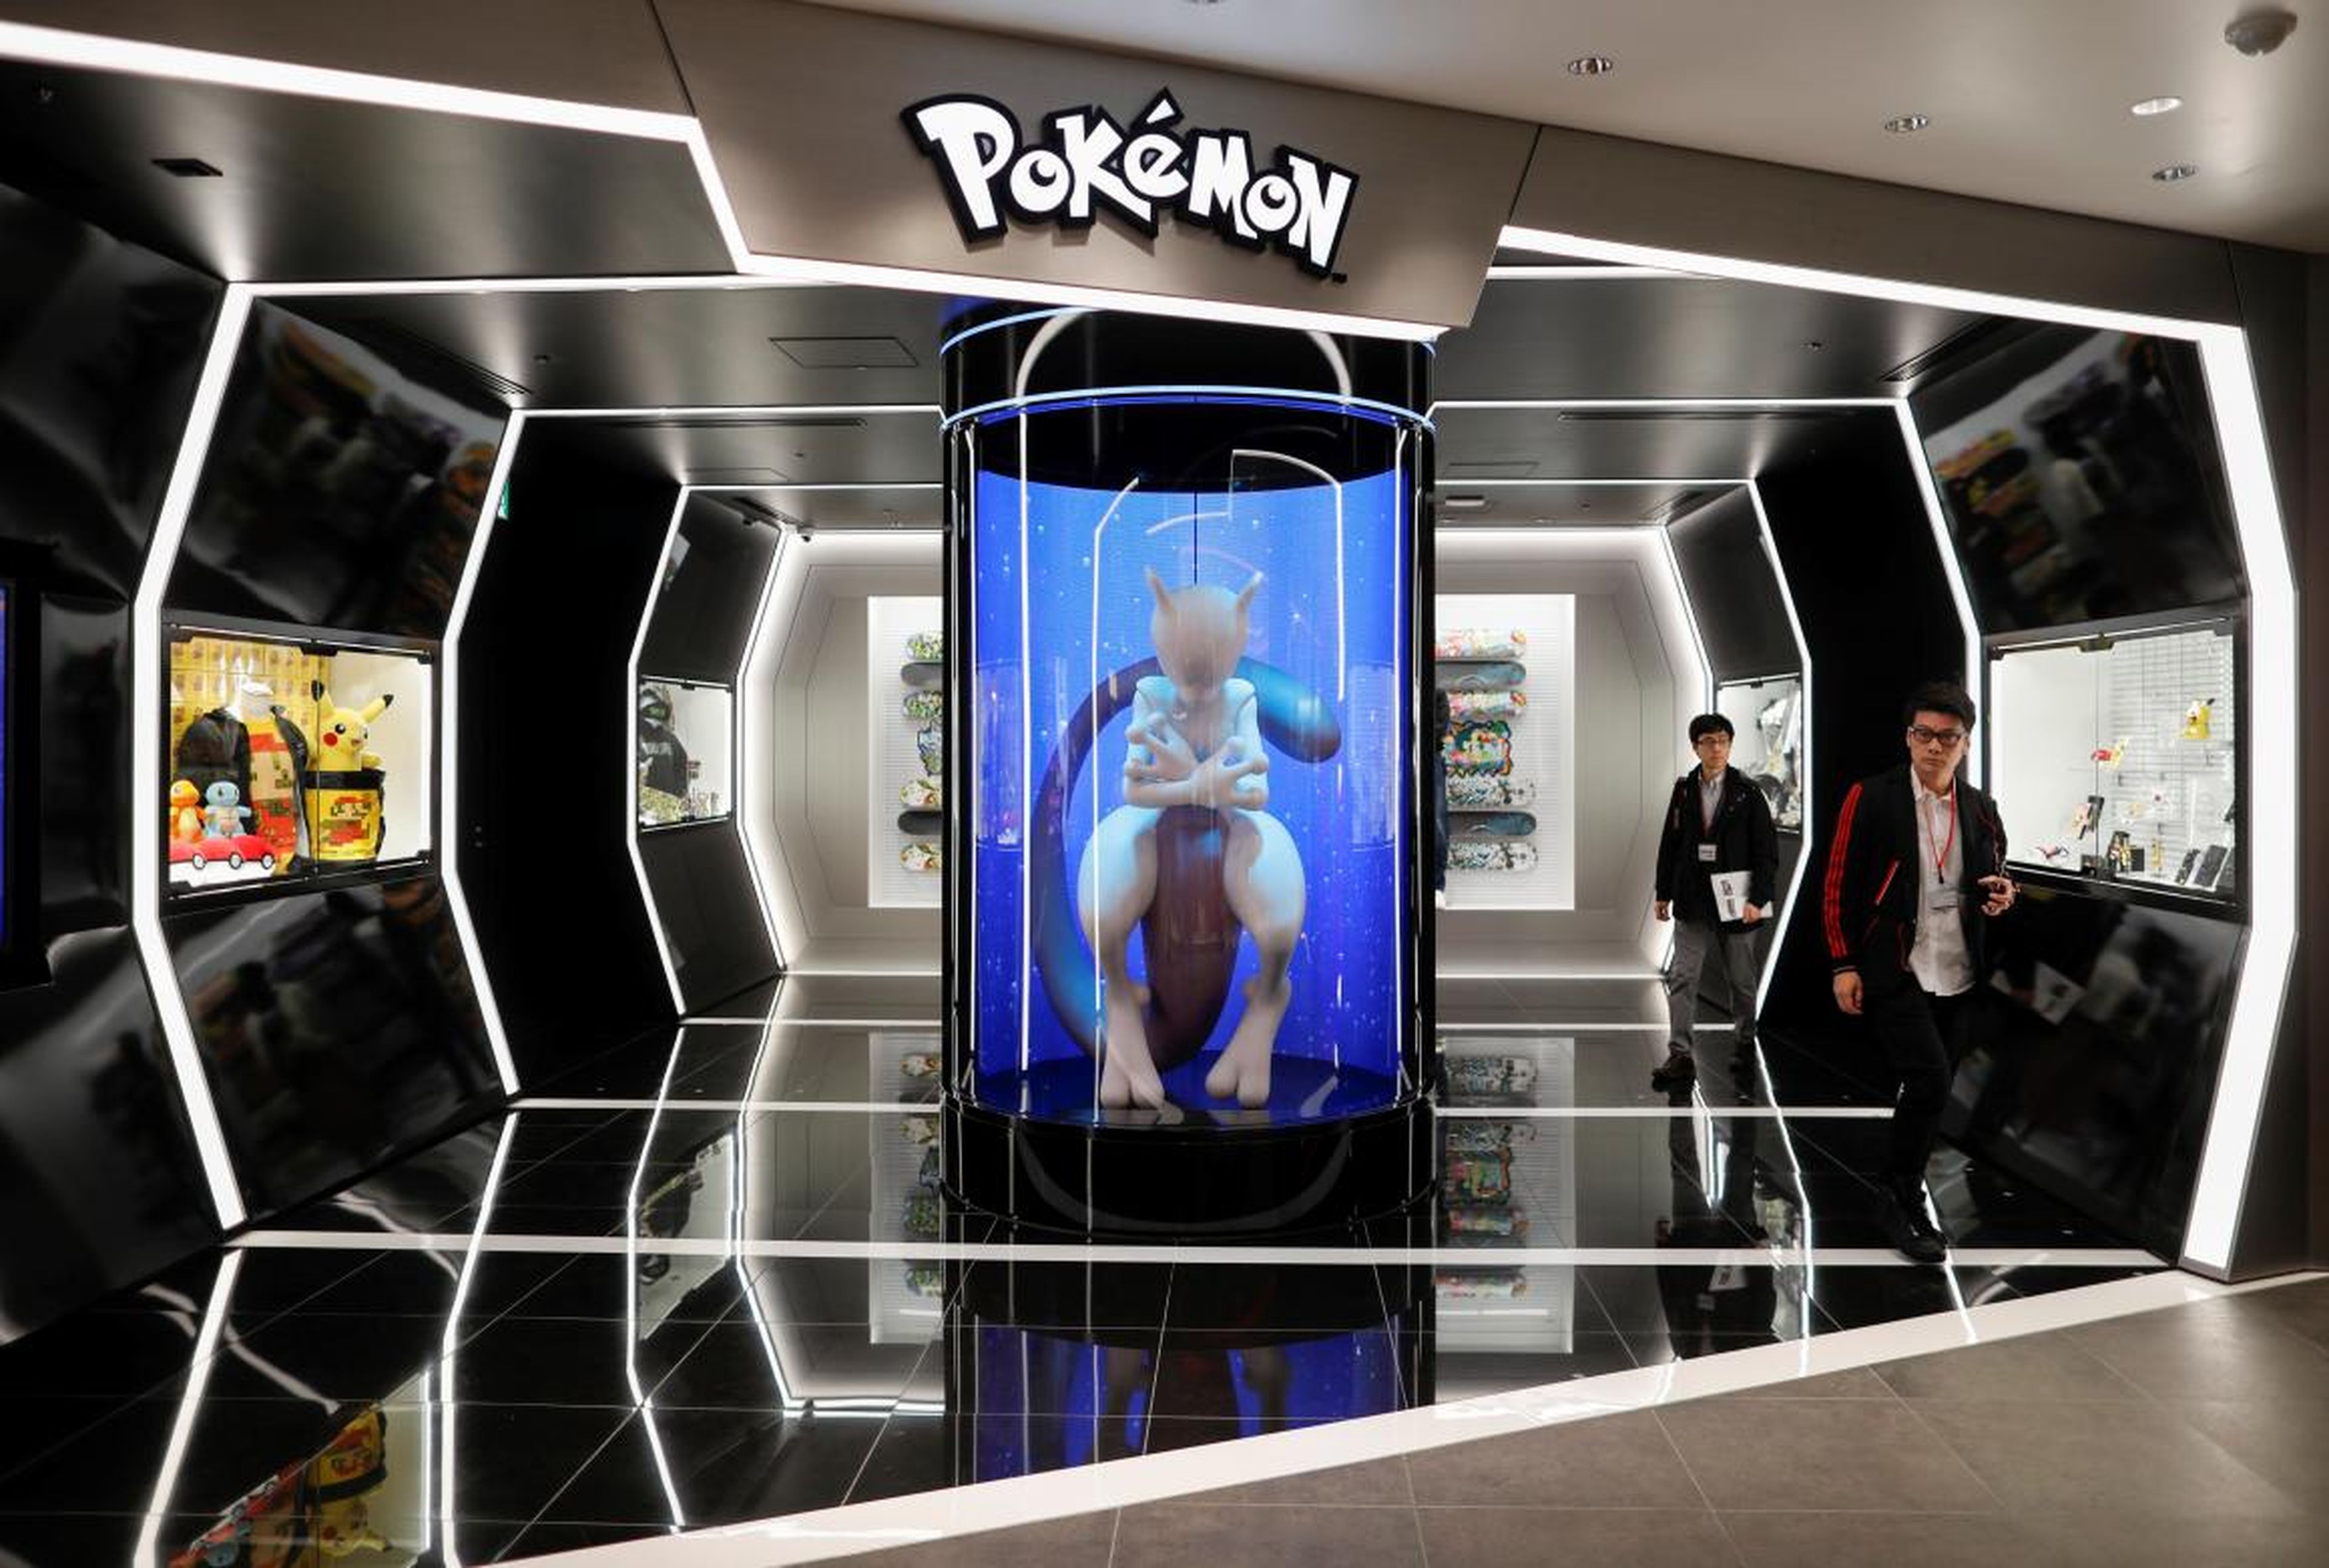 Nintendo Tokyo and Pokémon Center Shibuya are technically separate stores, though they are neighbors. The highlight of the Pokémon store is this life-sized Mewtwo statute inside of an incubation chamber.